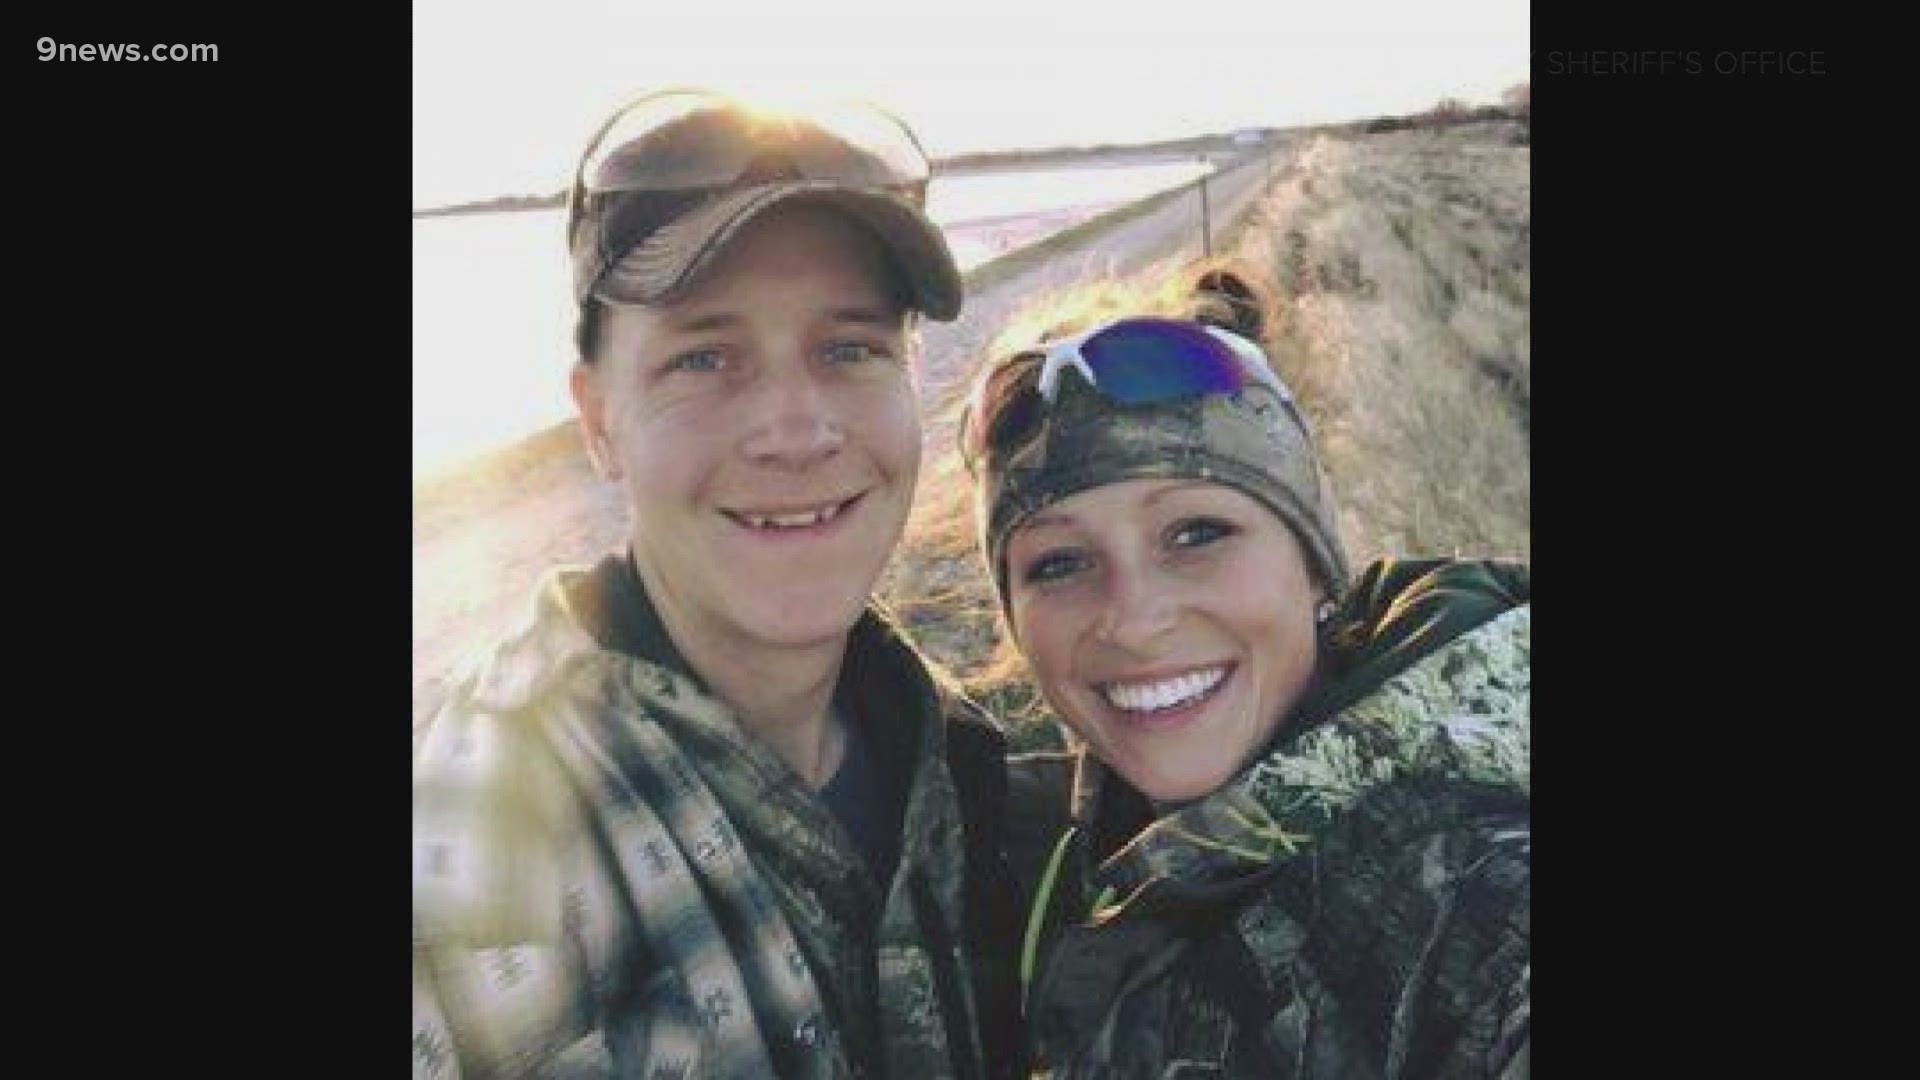 Cody and Shelby Allen were found dead Dec. 11. The coroner said they died from carbon dioxide poisoning at their home.